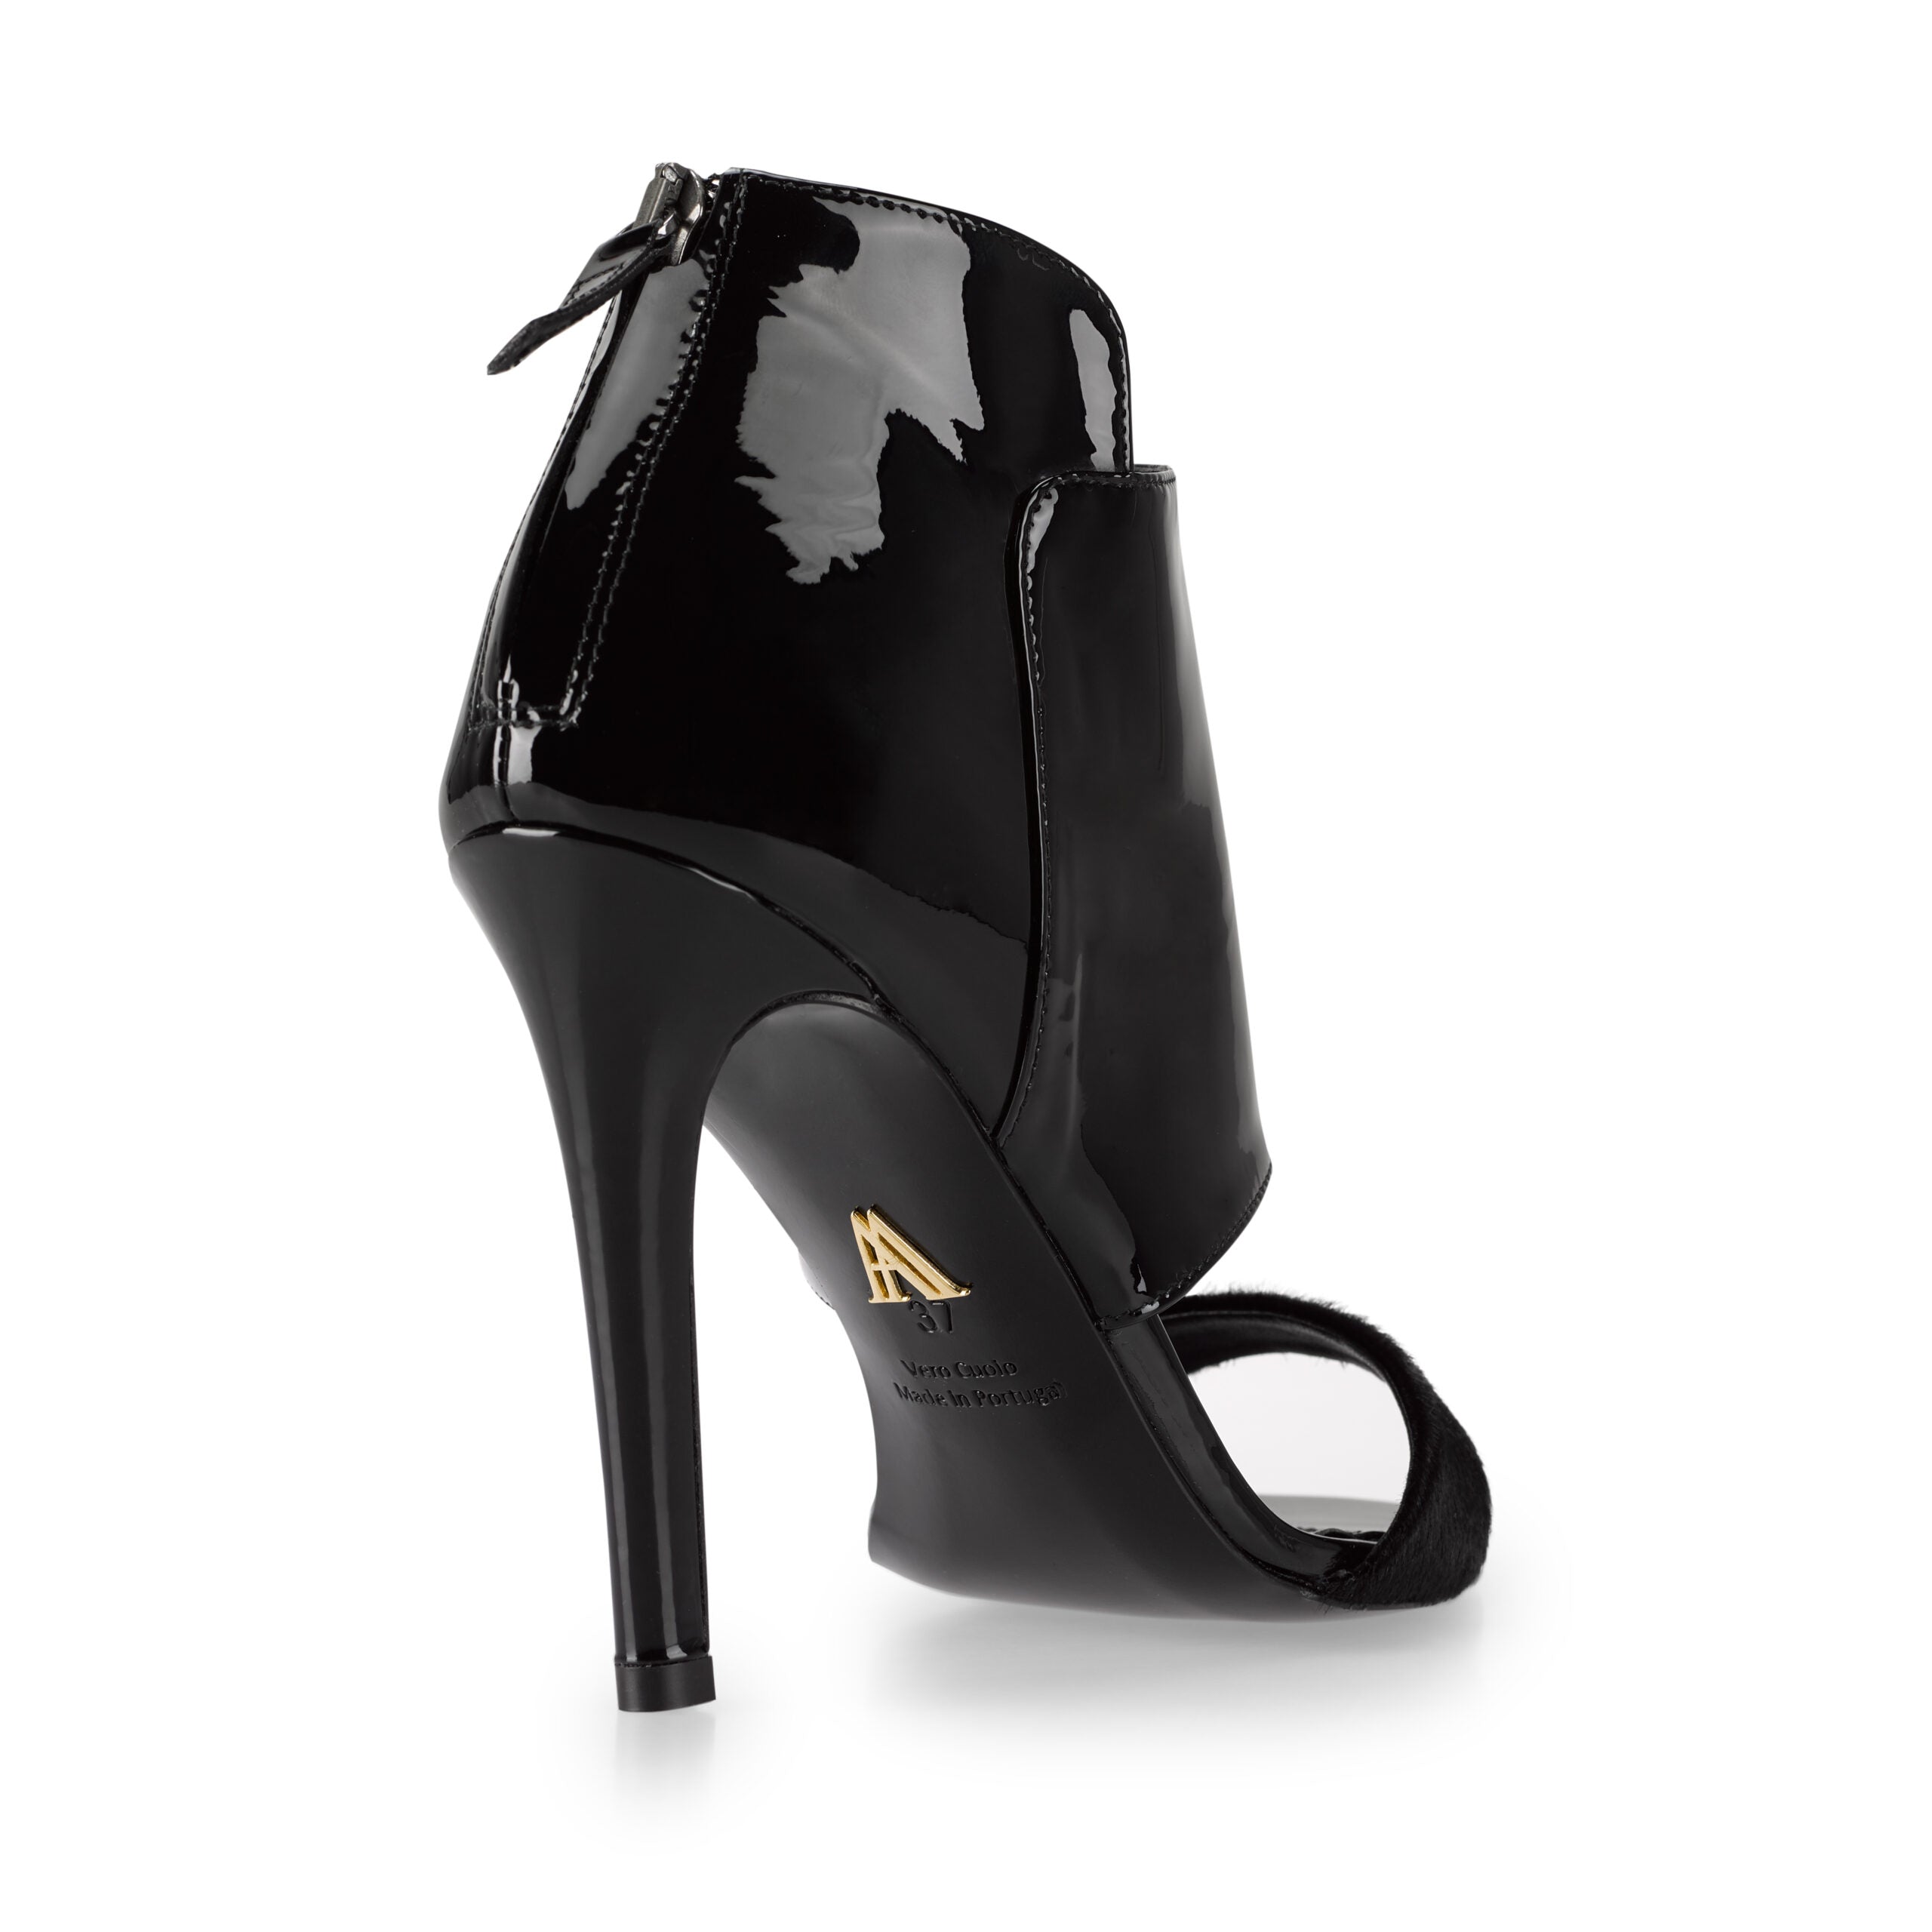 Handcrafted in portugal from black patent leather, the pair sits on a classic stiletto heel.